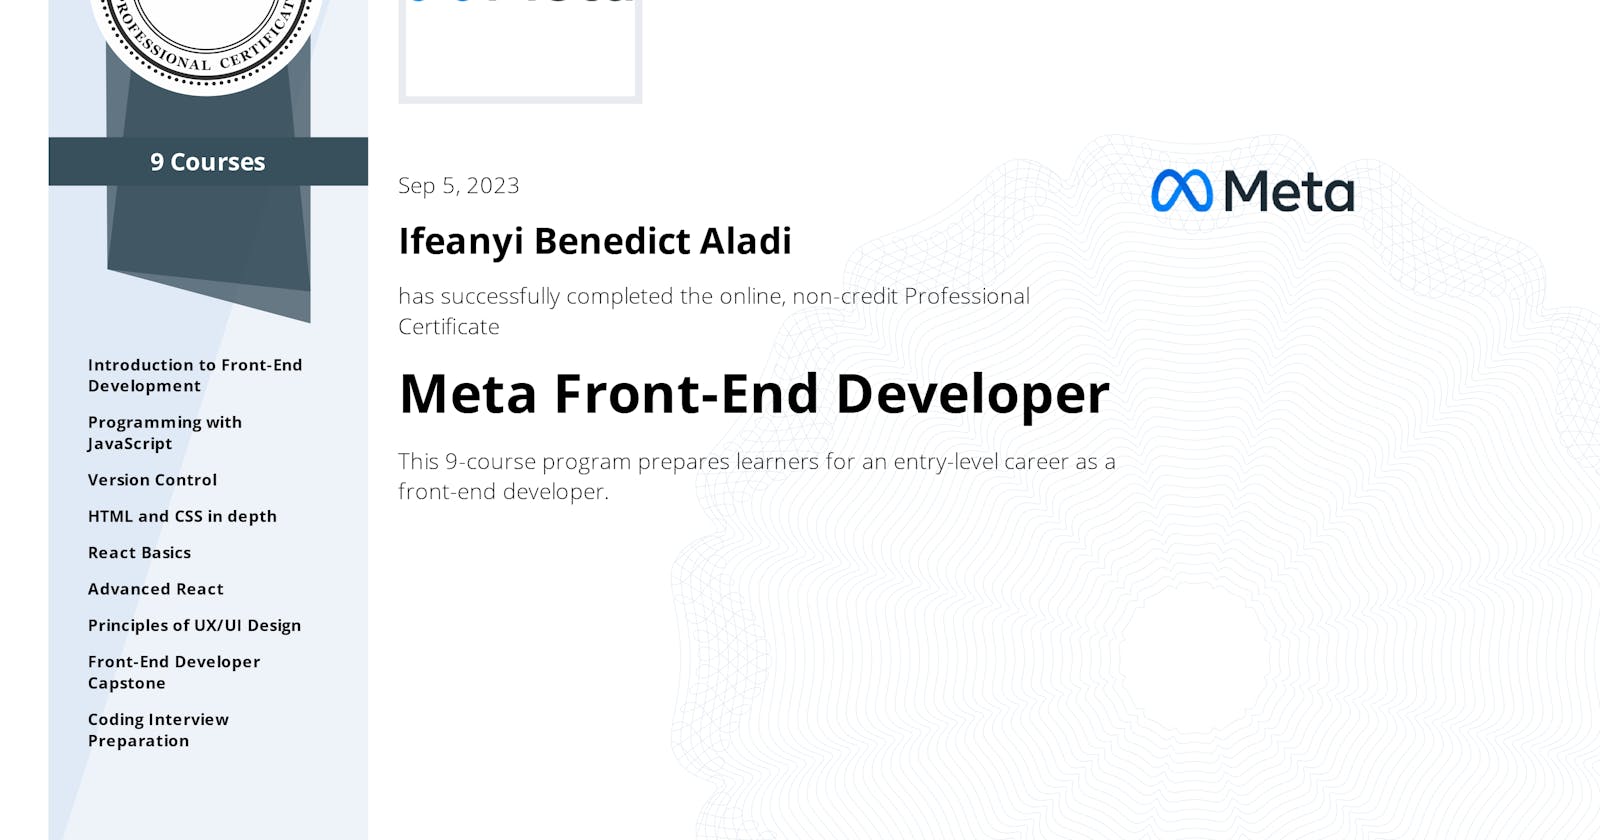 I finished the Meta Frontend Developer Course - Here's what I learned